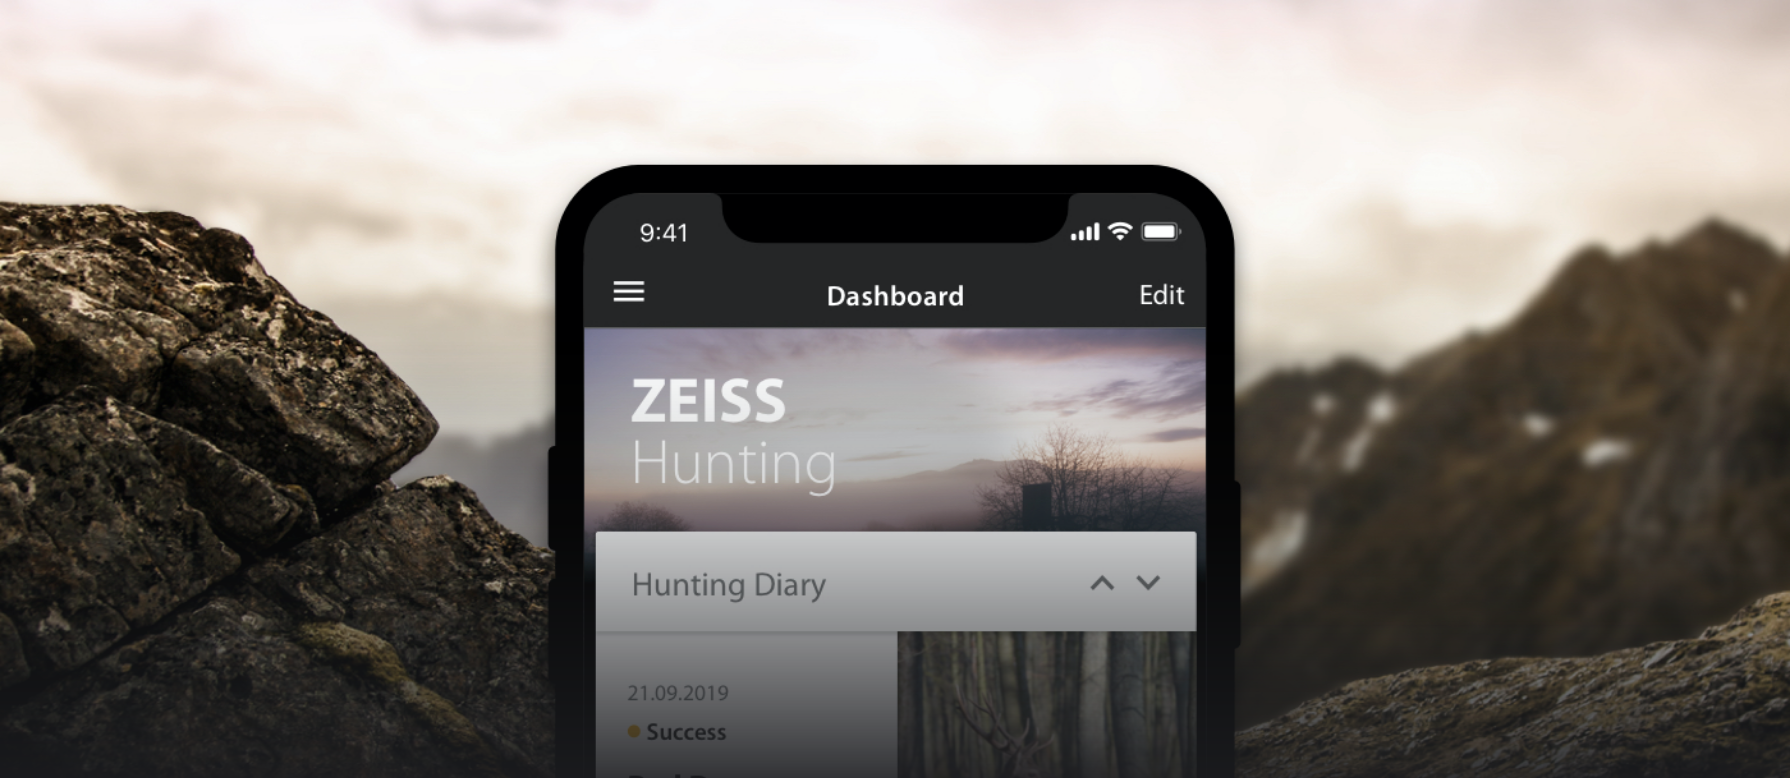 Phone with ZEISS Hunting app and mountainous backdrop